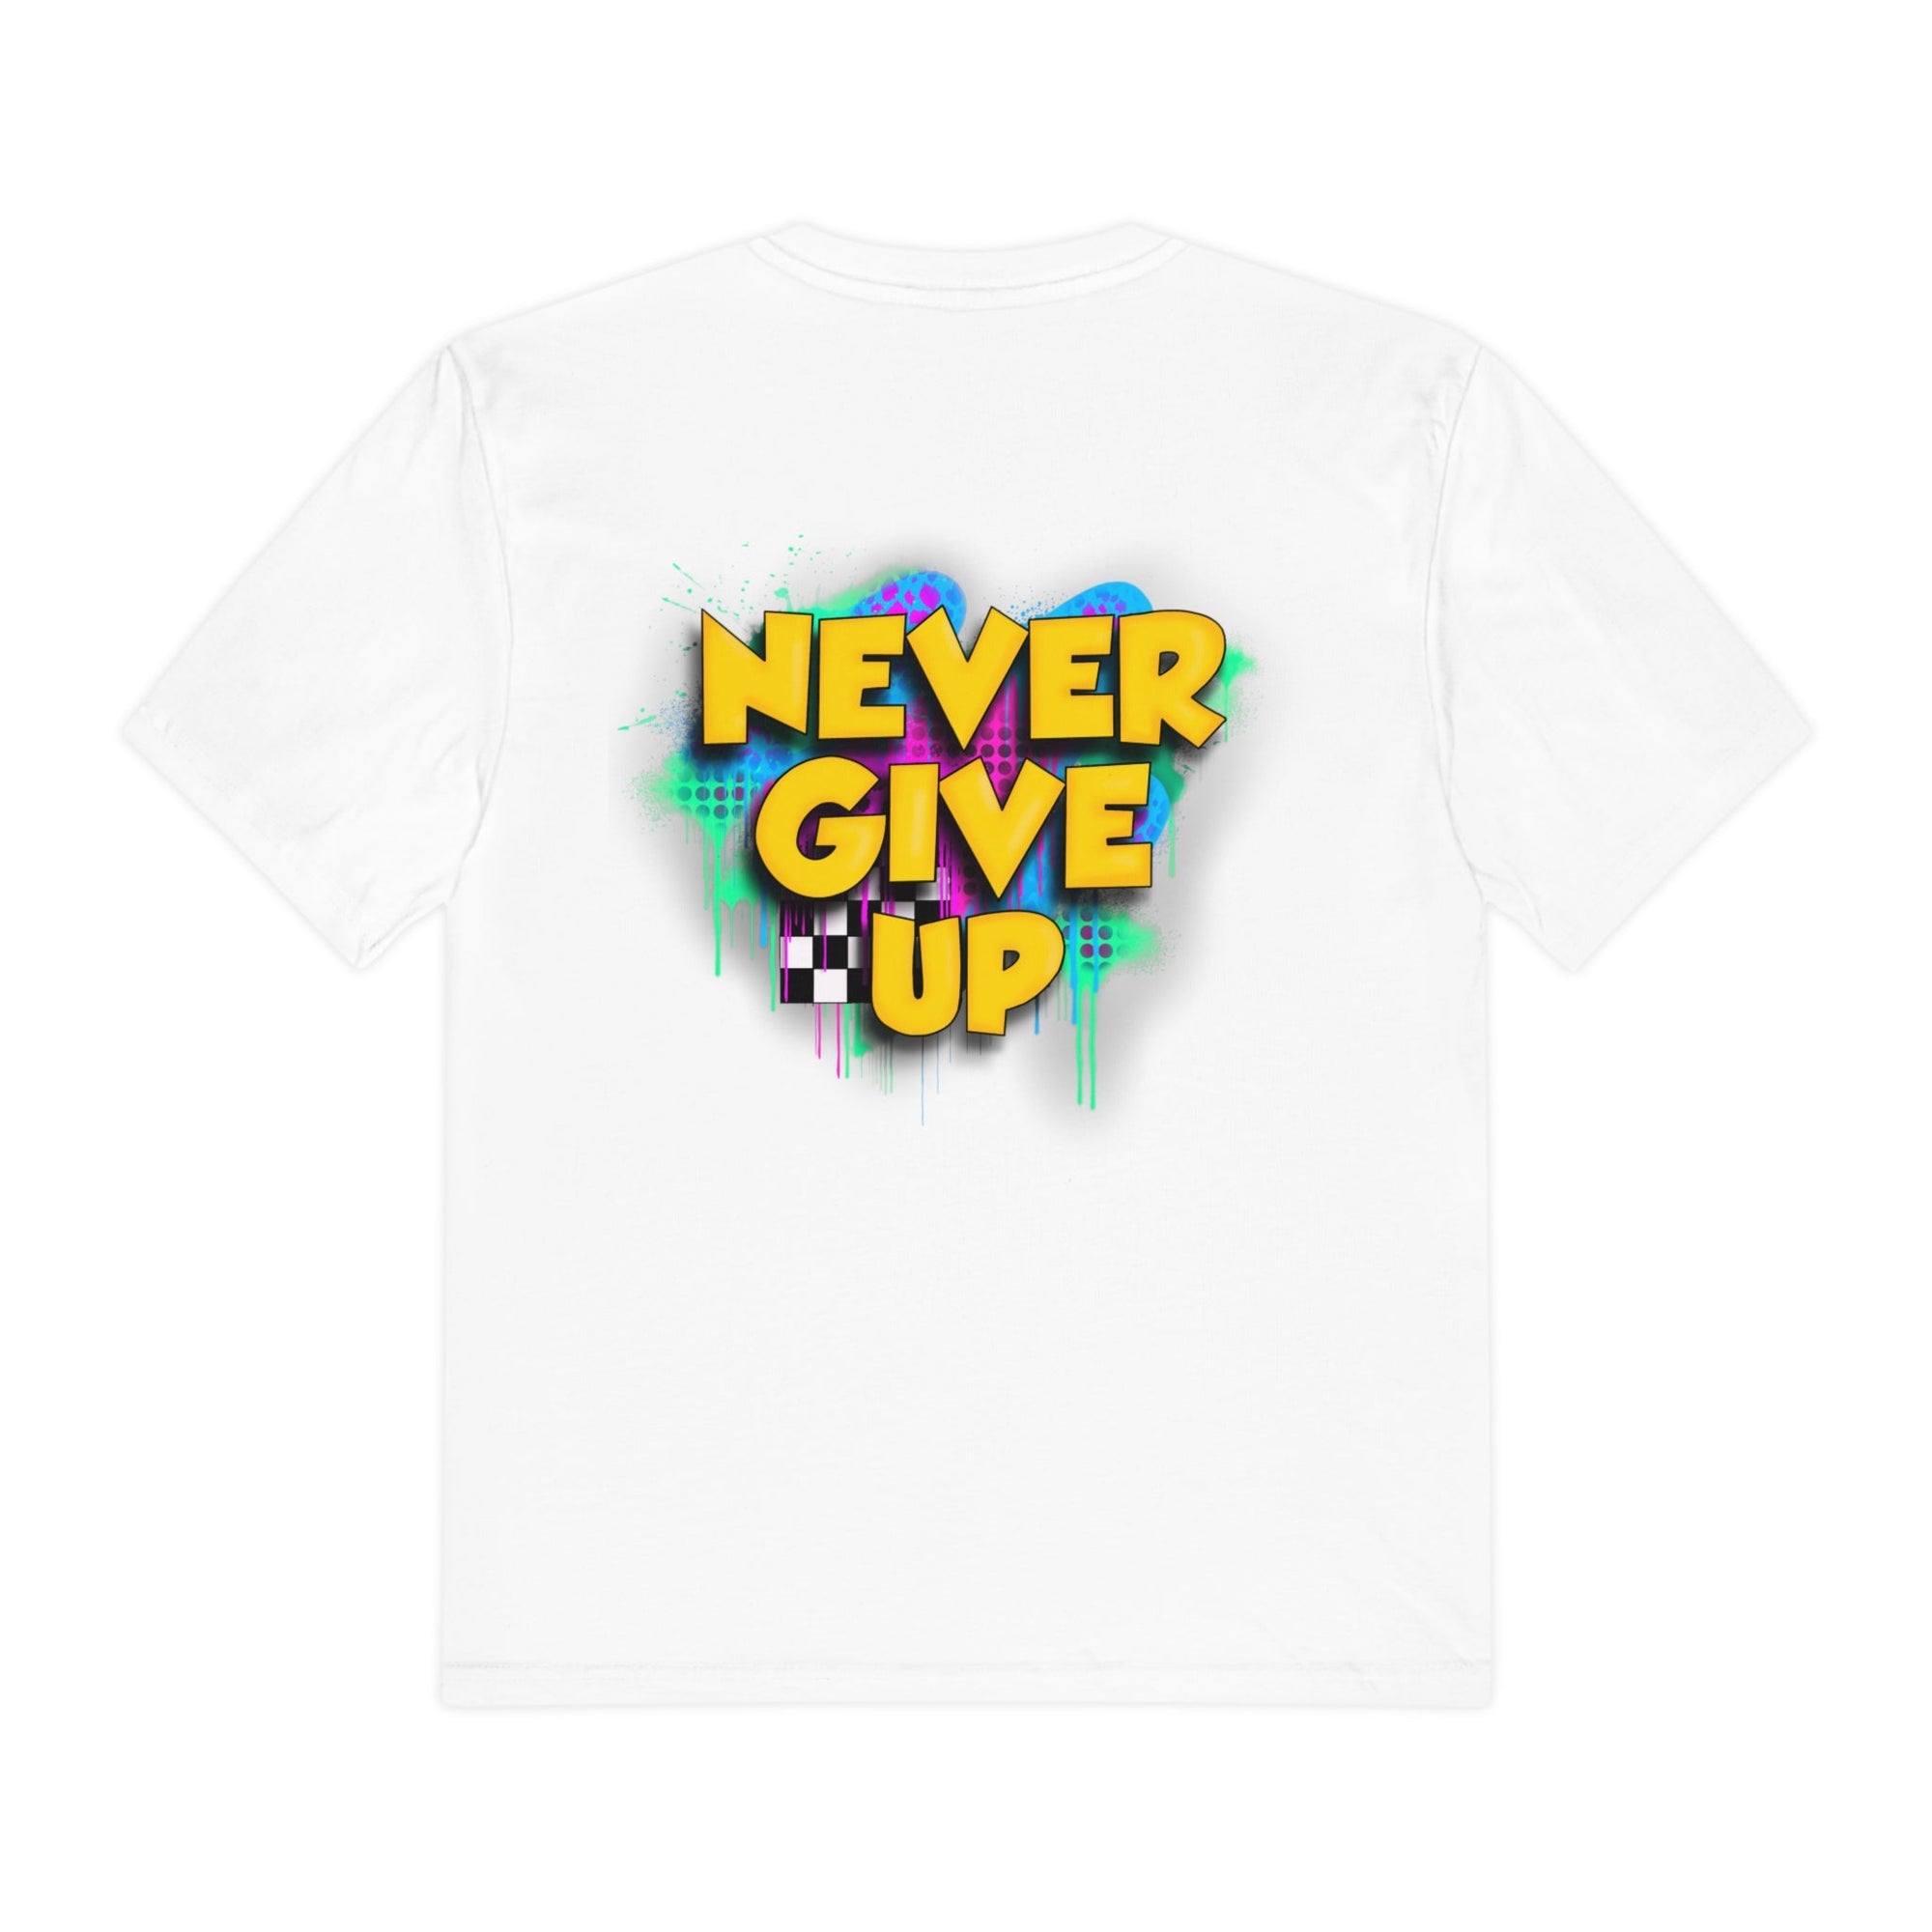 NEVER GIVE UP SK T - Sean Keith Art